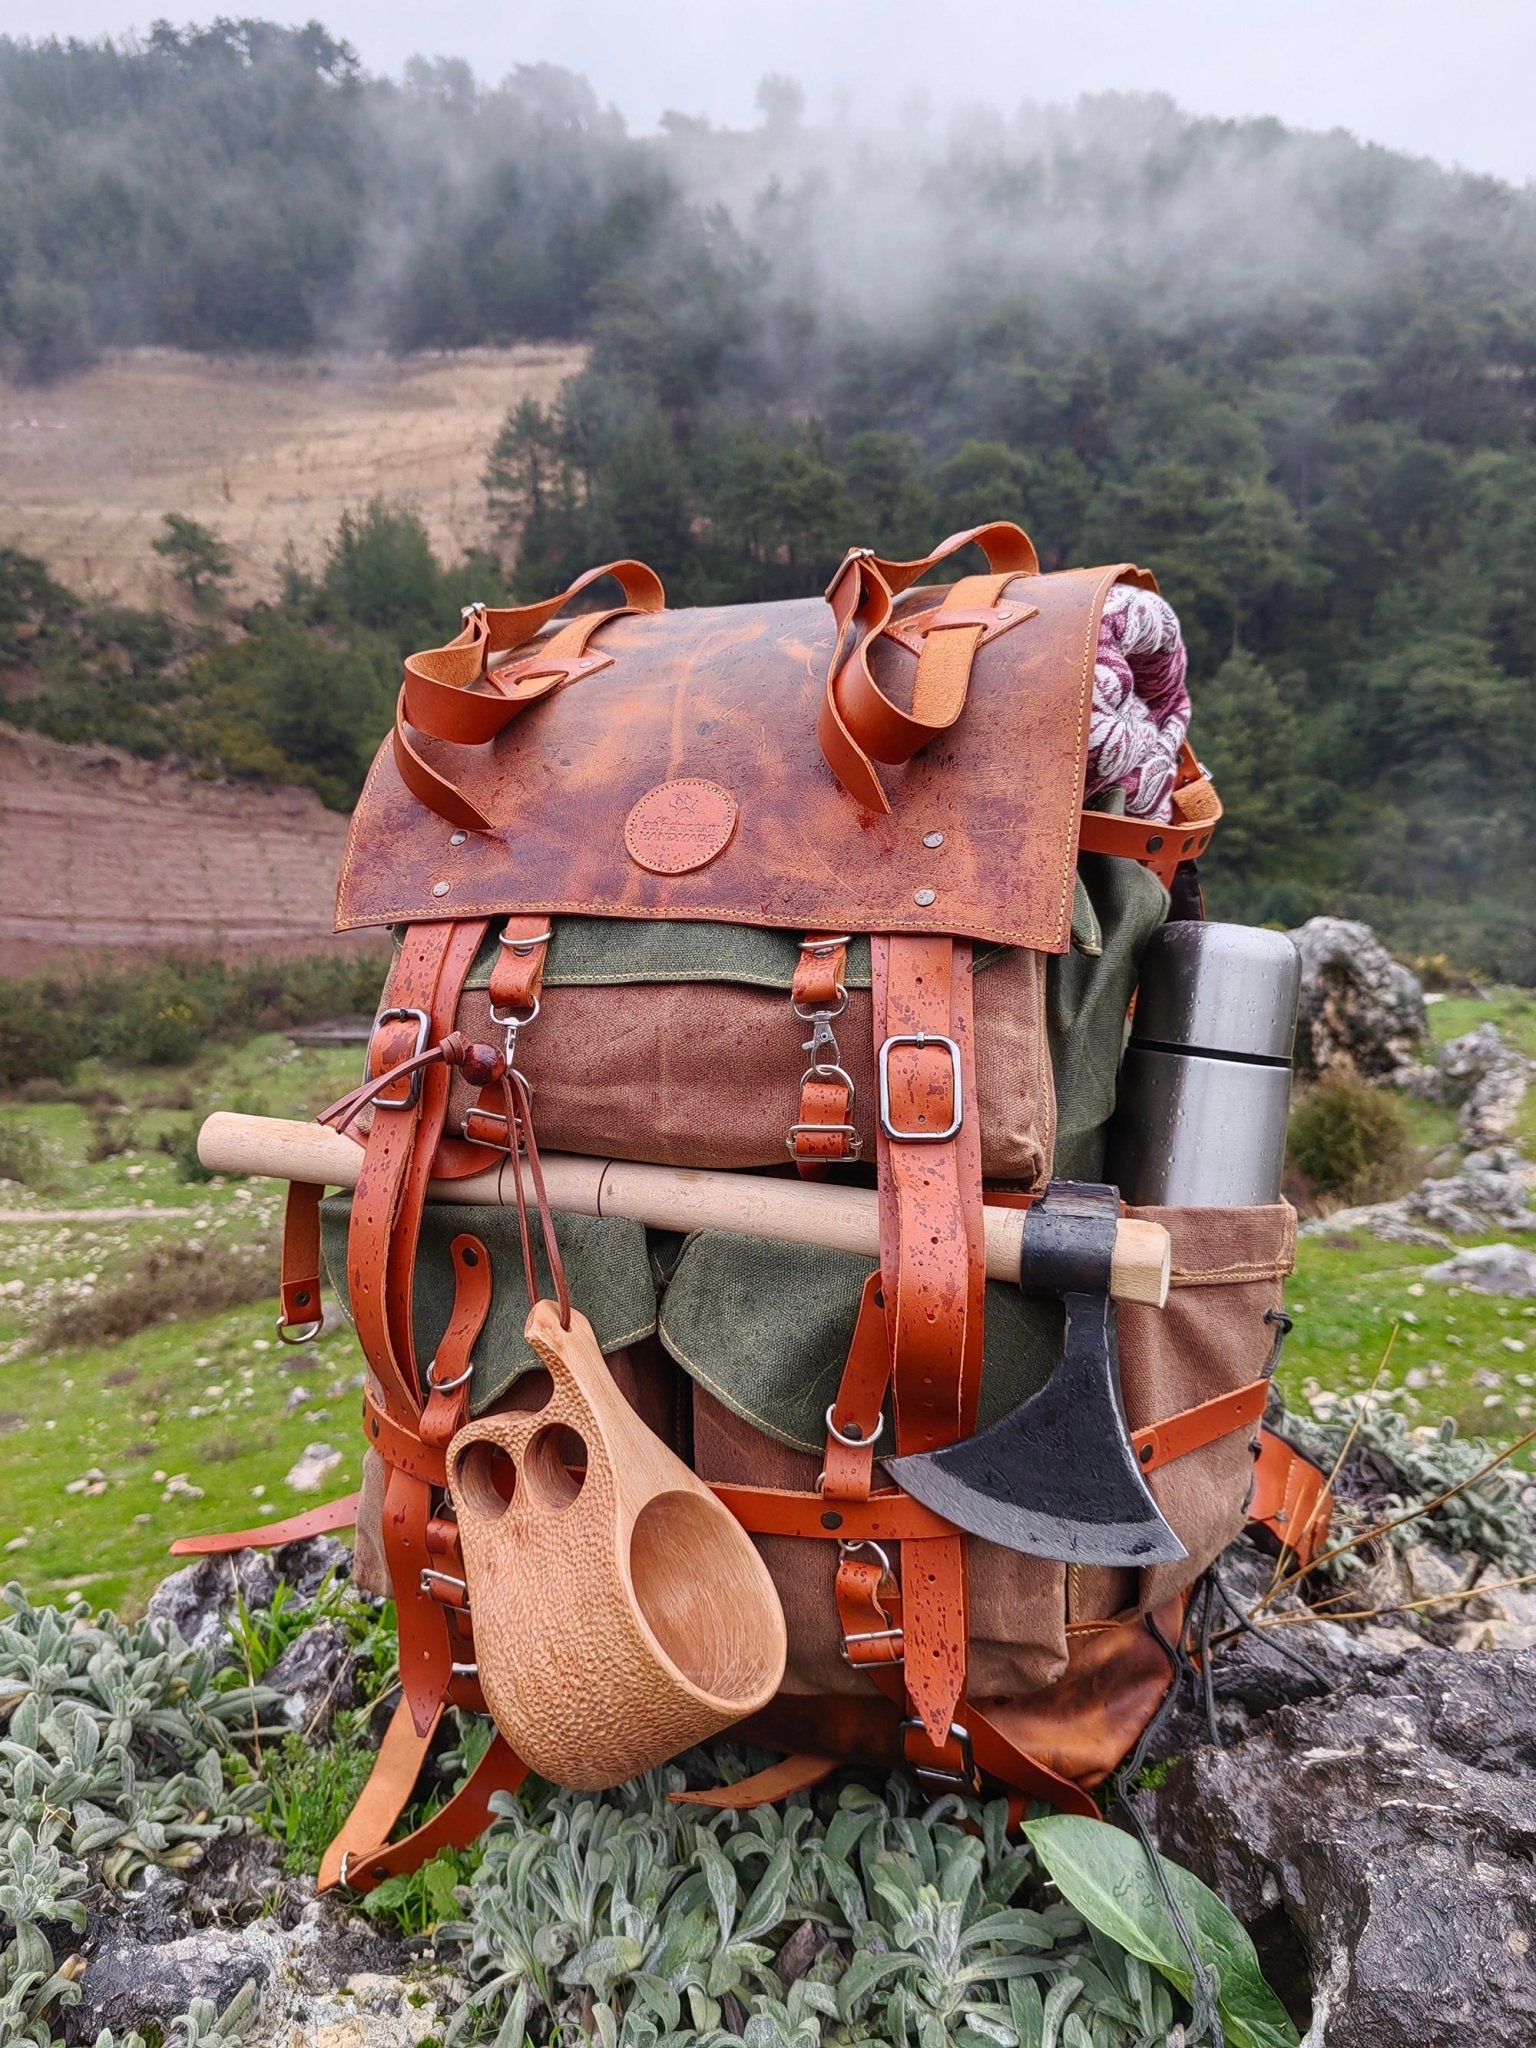 New Model | Limited Handmade Leather and Waxed Backpack for Travel, Camping | inside 45 Liter | Personalization  99percenthandmade   